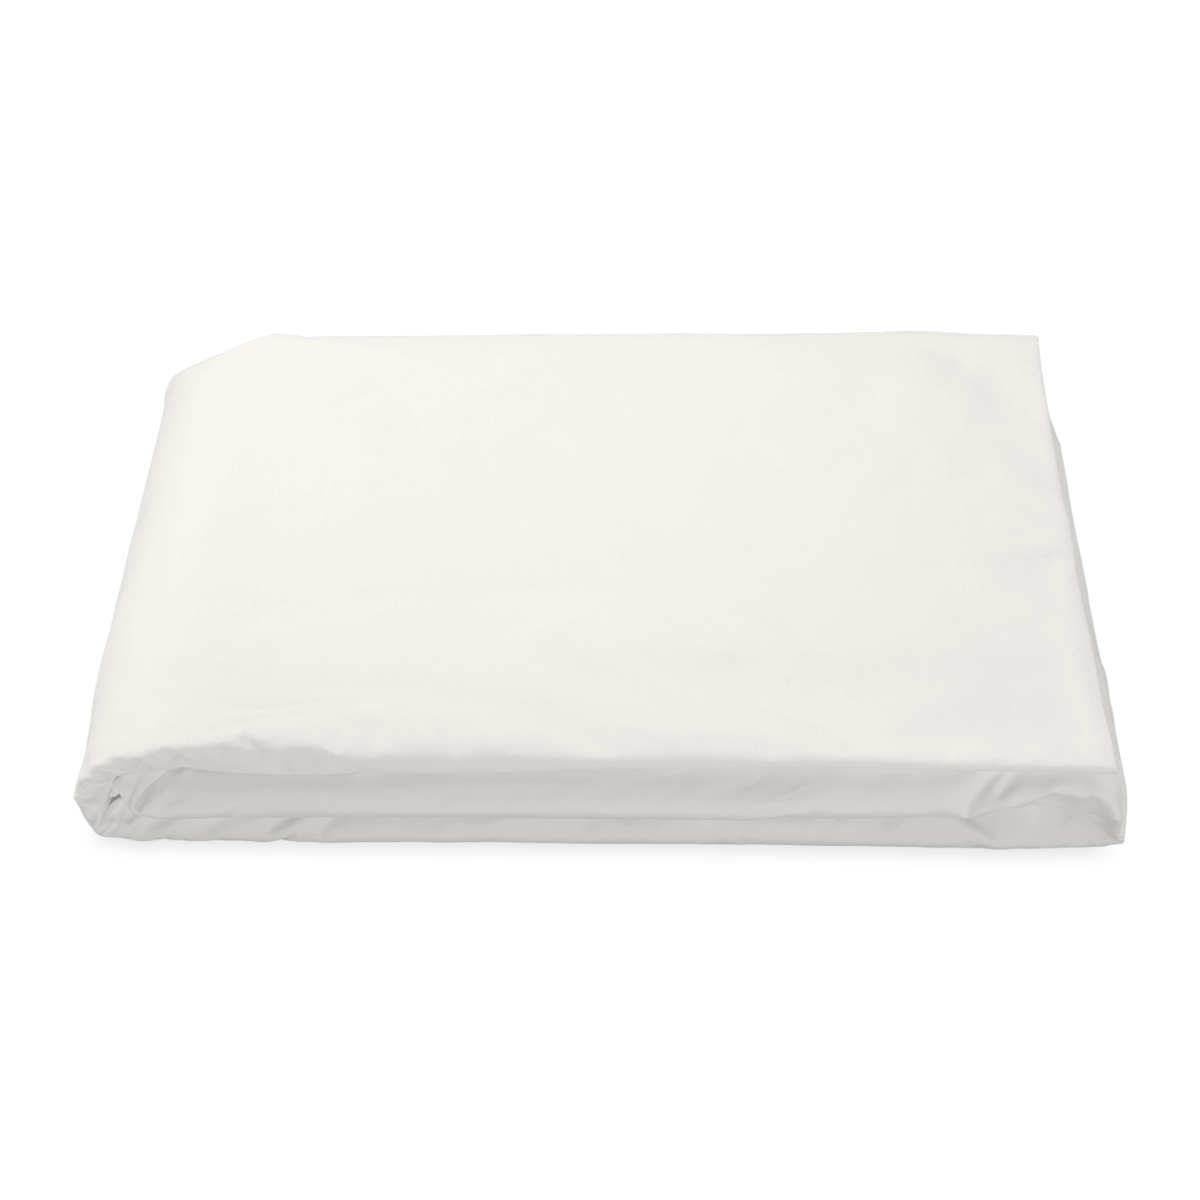 Fitted Sheet of Matouk Luca Hemstitch Bedding in Bone Color